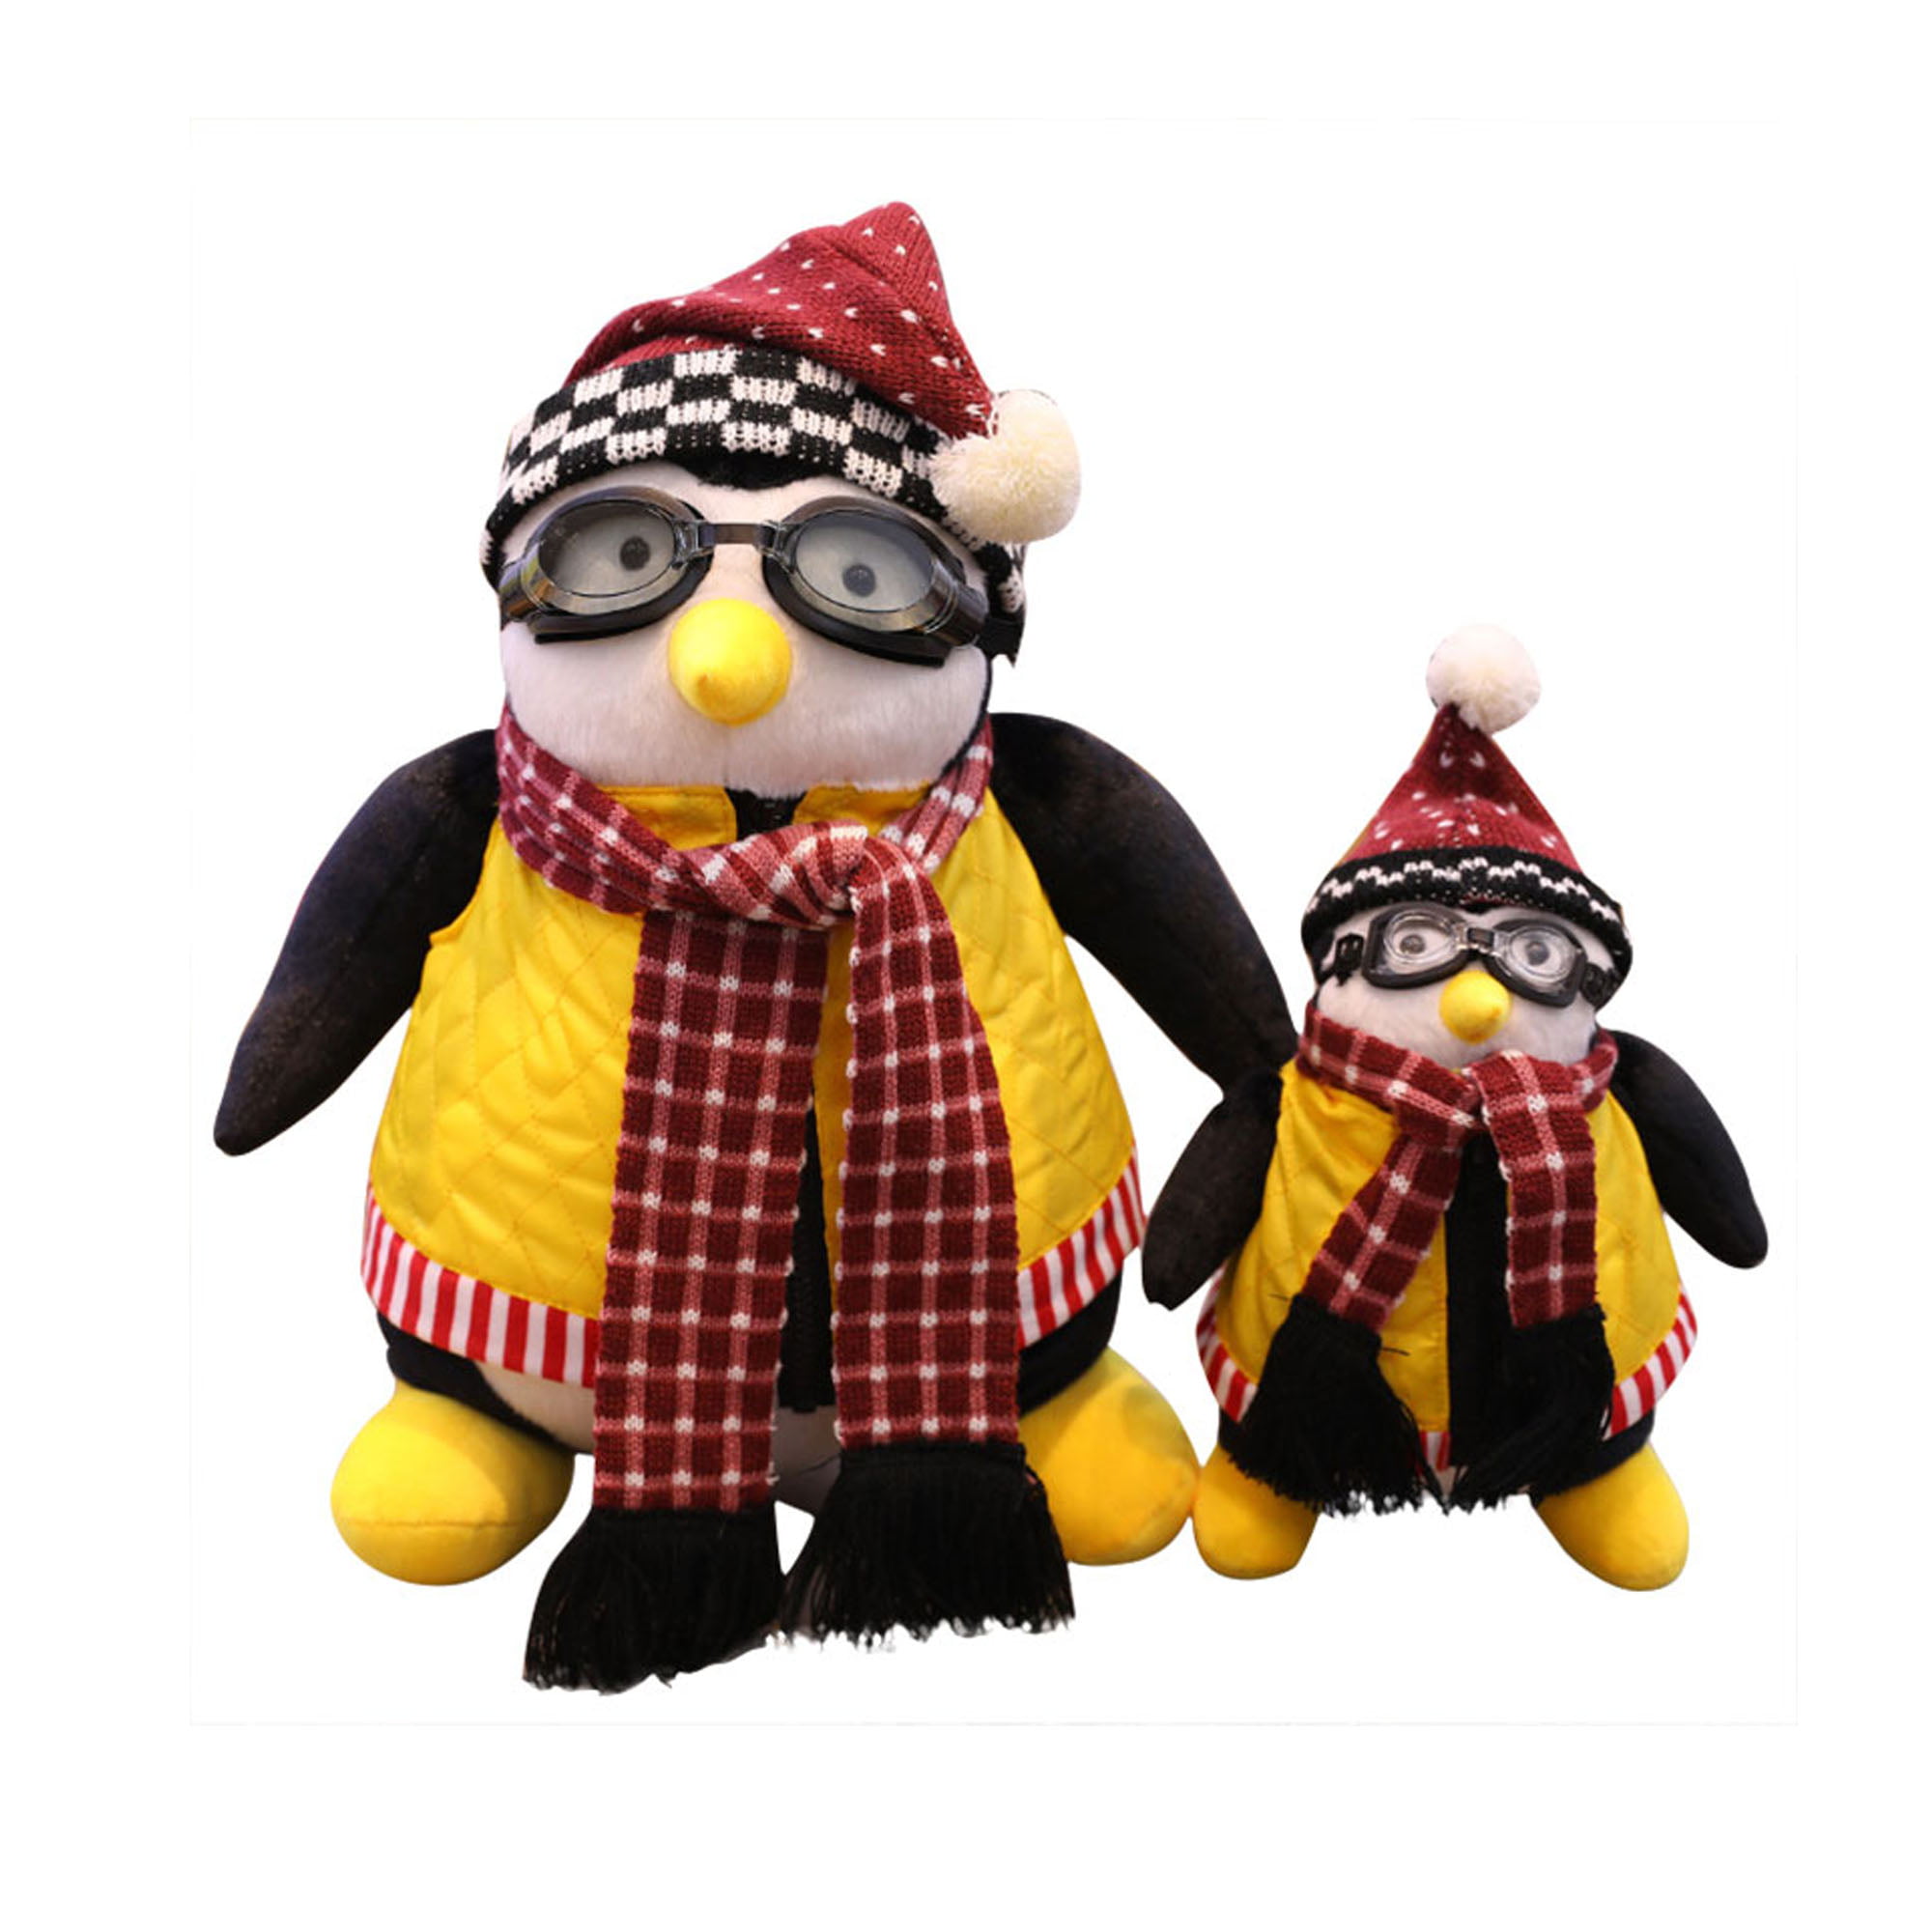 HUGSY PENGUIN WITH GOGGLES AND VEST FRIENDS JOEY'S HUGGSY BEST HOLIDAY GIFT 